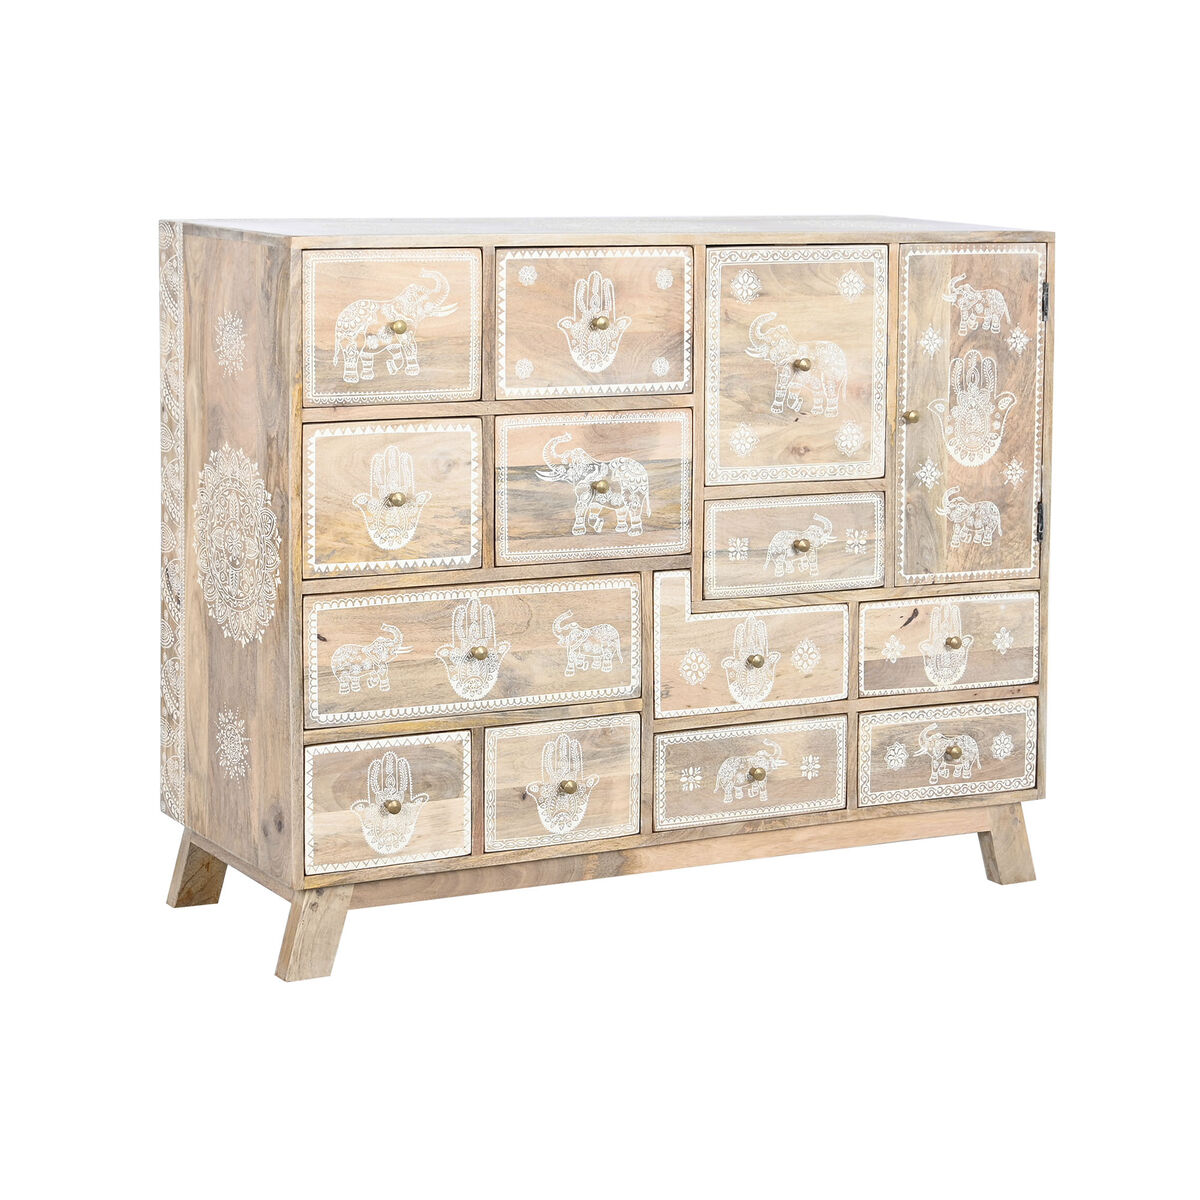 Chest of drawers DKD Home Decor 112 x 36 x 89,5 cm Natural Mango wood MDF Wood